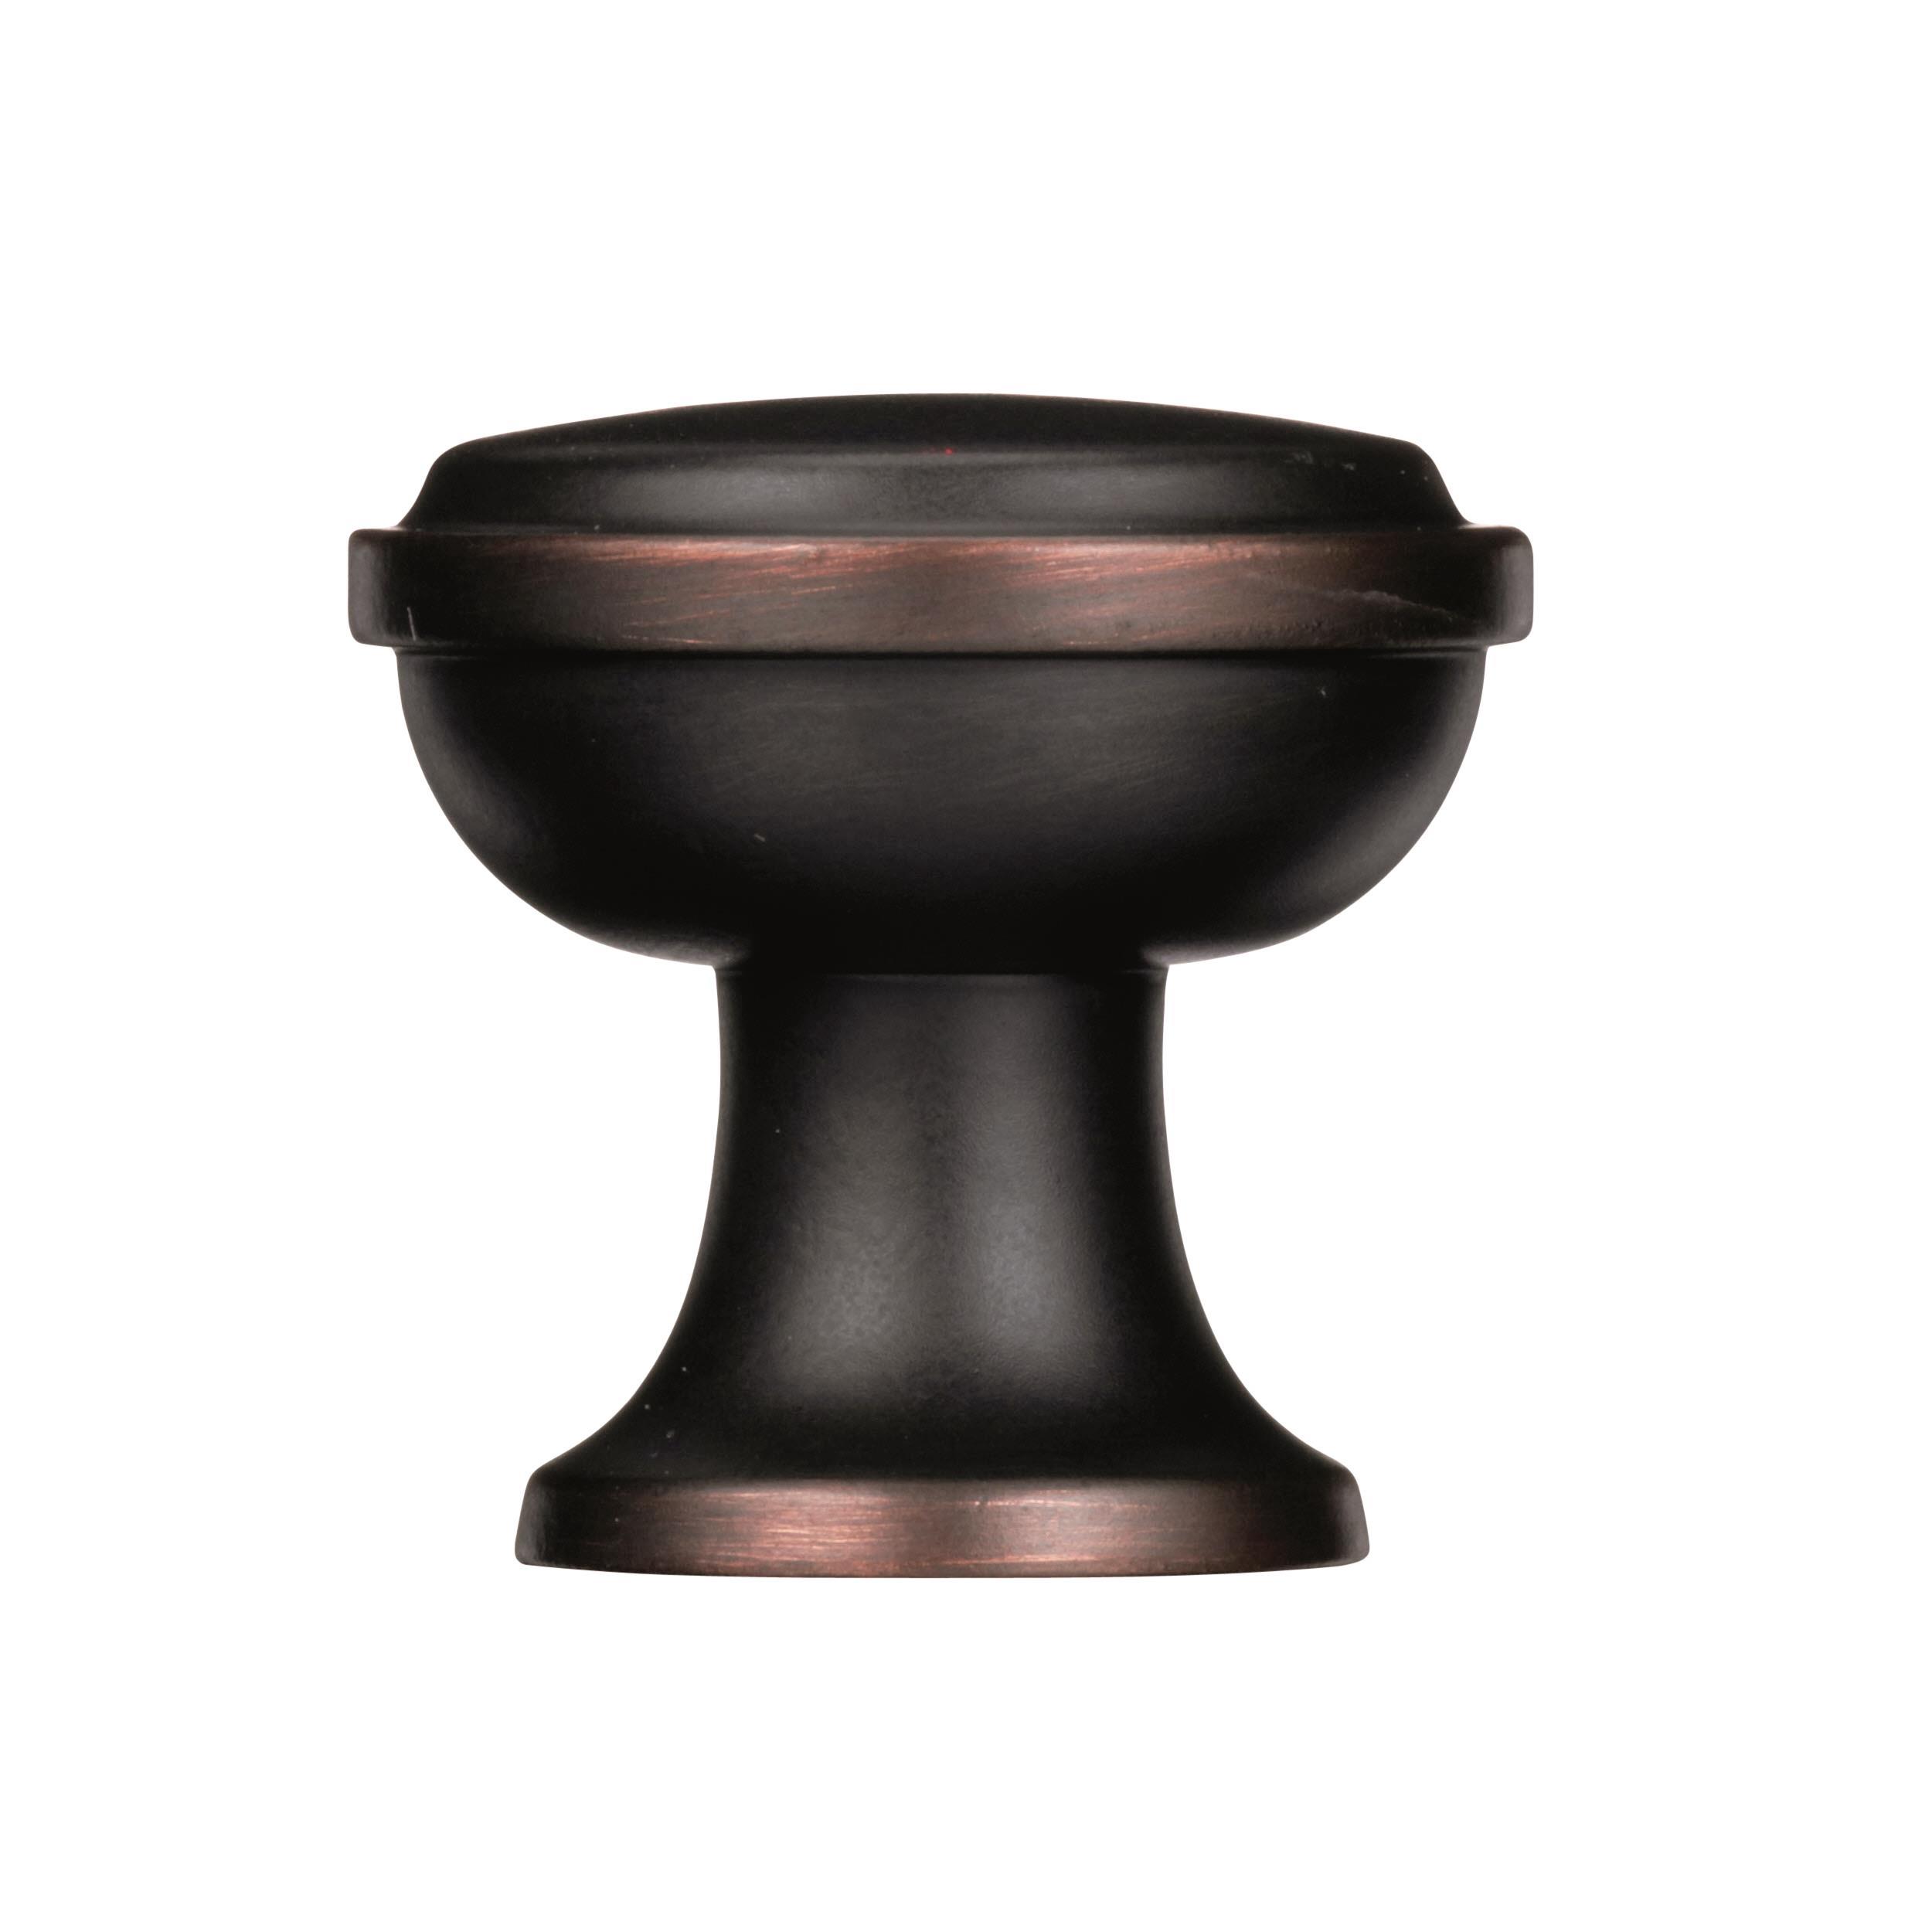 Westerly Round Knob, 1-3/16 in (30 mm), Oil-Rubbed Bronze